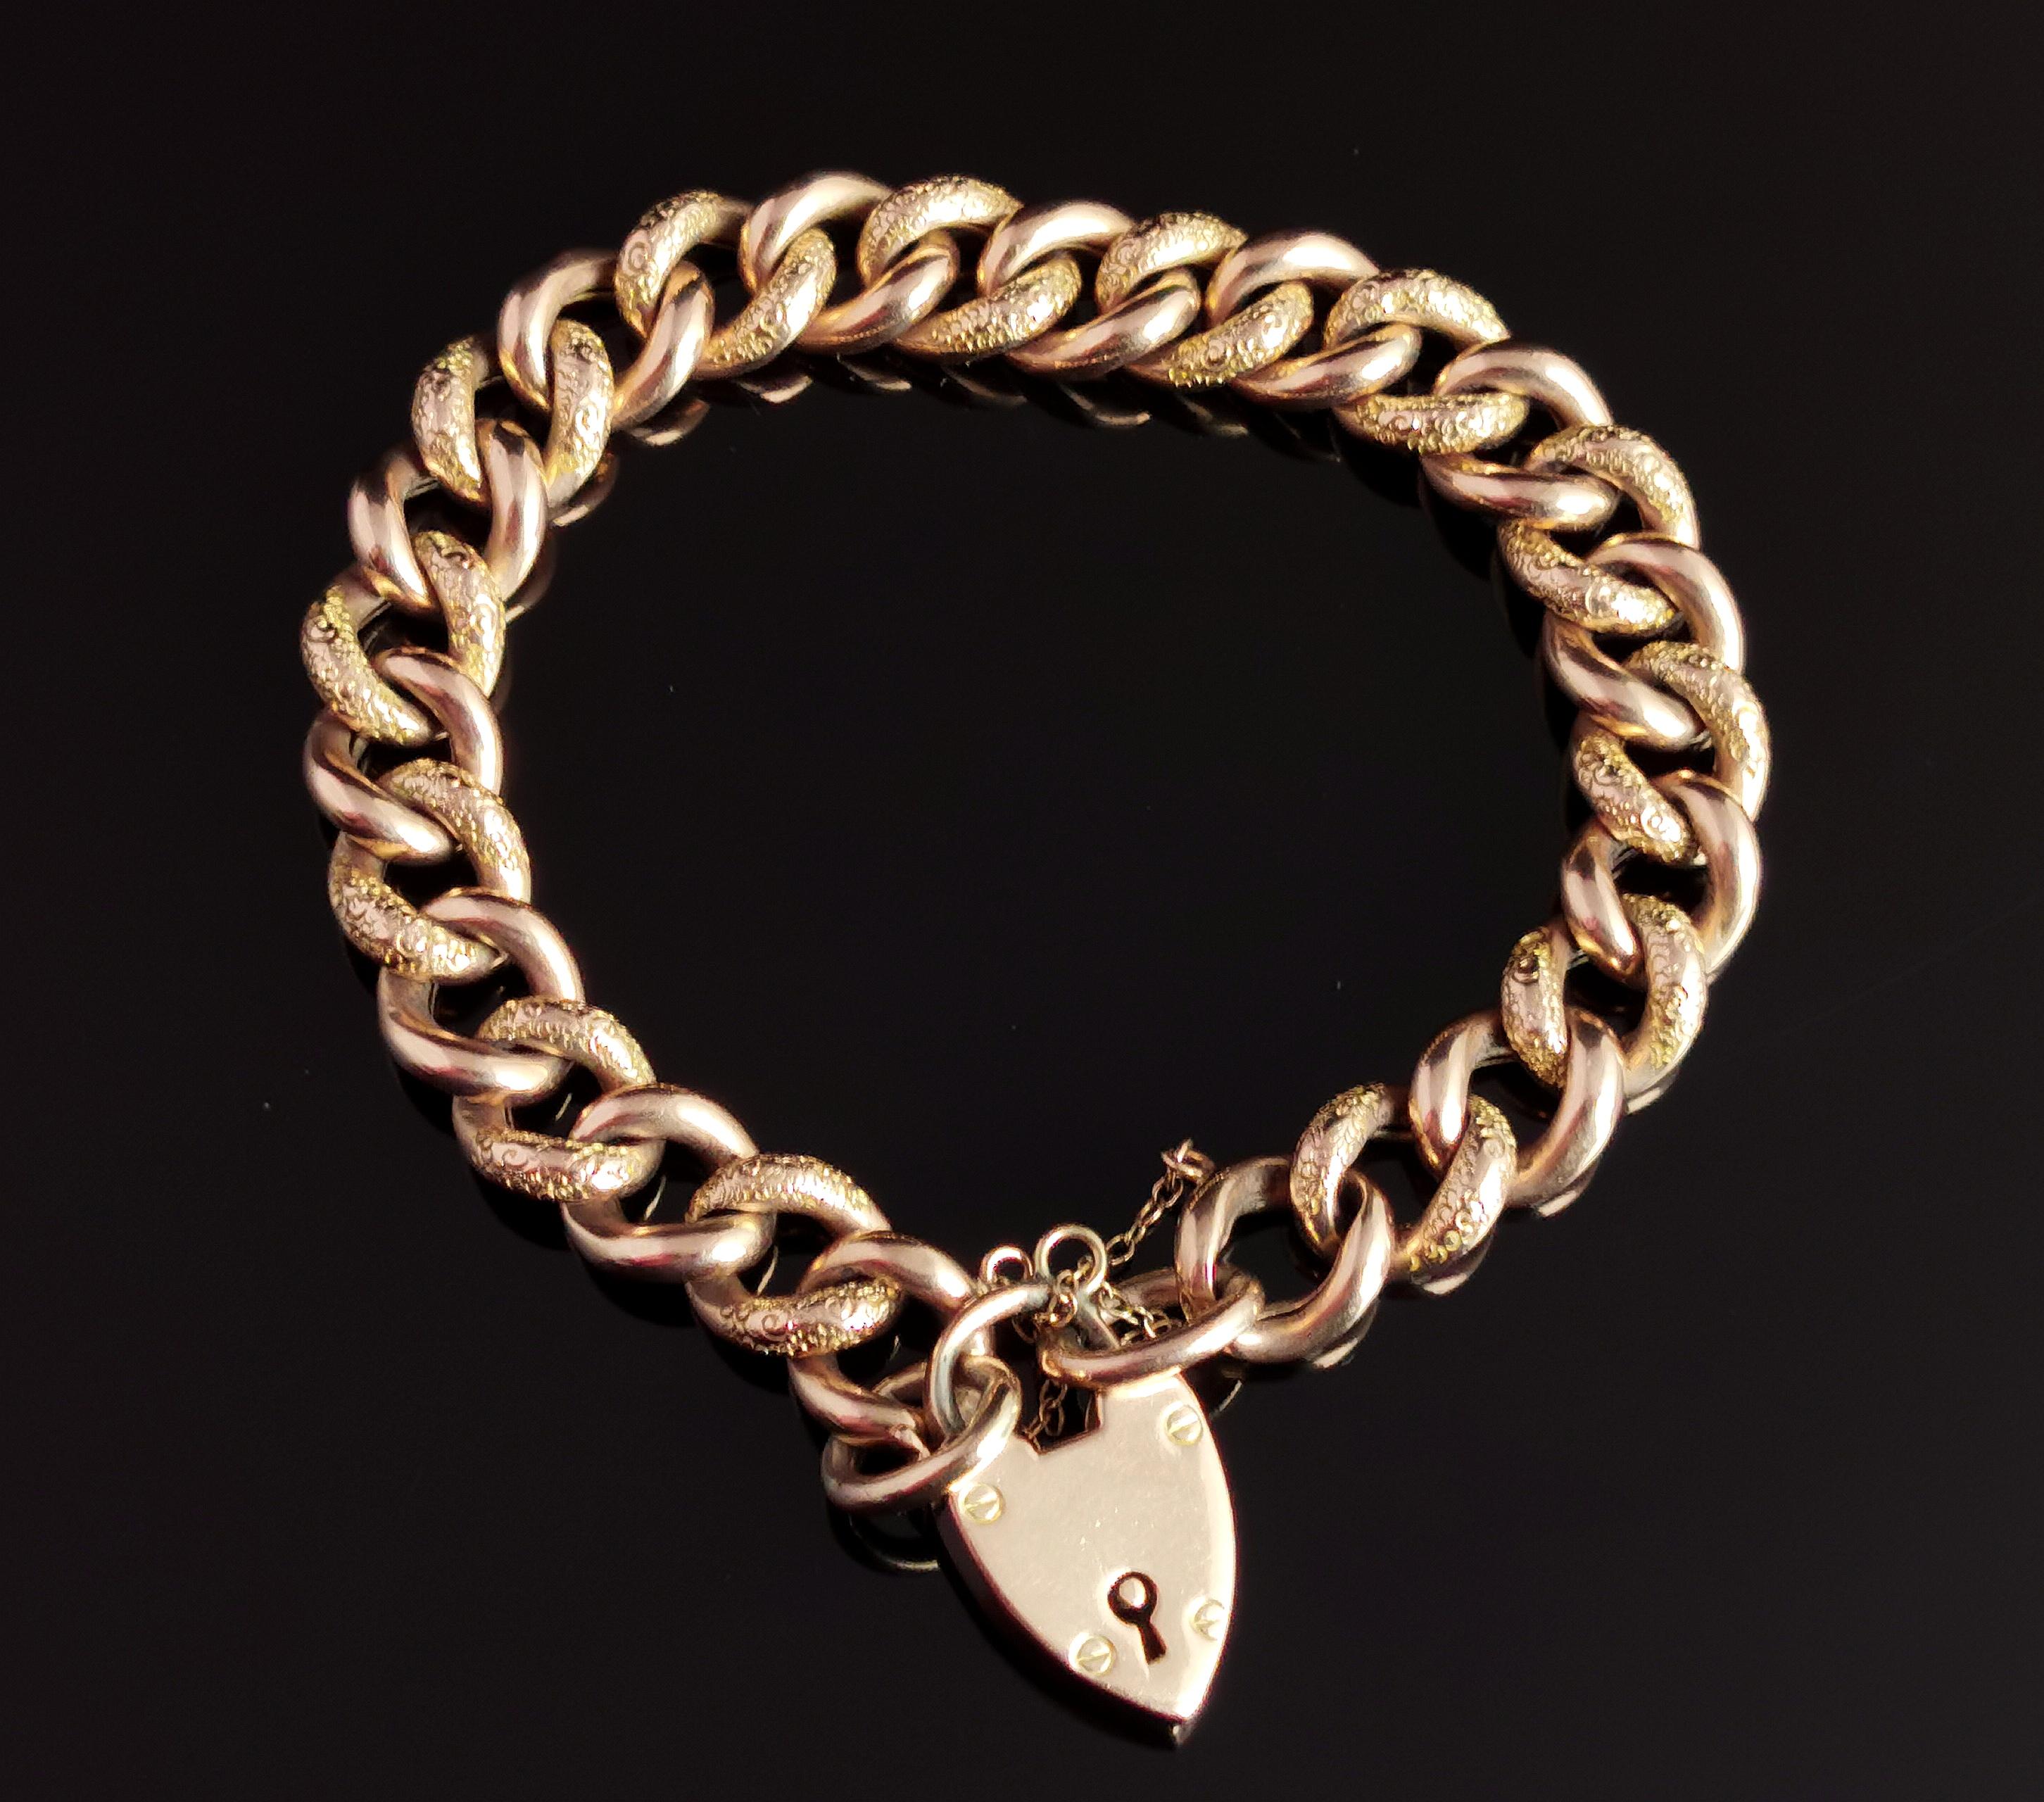 A stunning antique, late Victorian era 9kt gold curb bracelet.

Chunky rich gold curb links, each individually engraved on one side and plain on the other, designed to go effortlessly from day to night wear.

The gold has both yellow and rosey tones